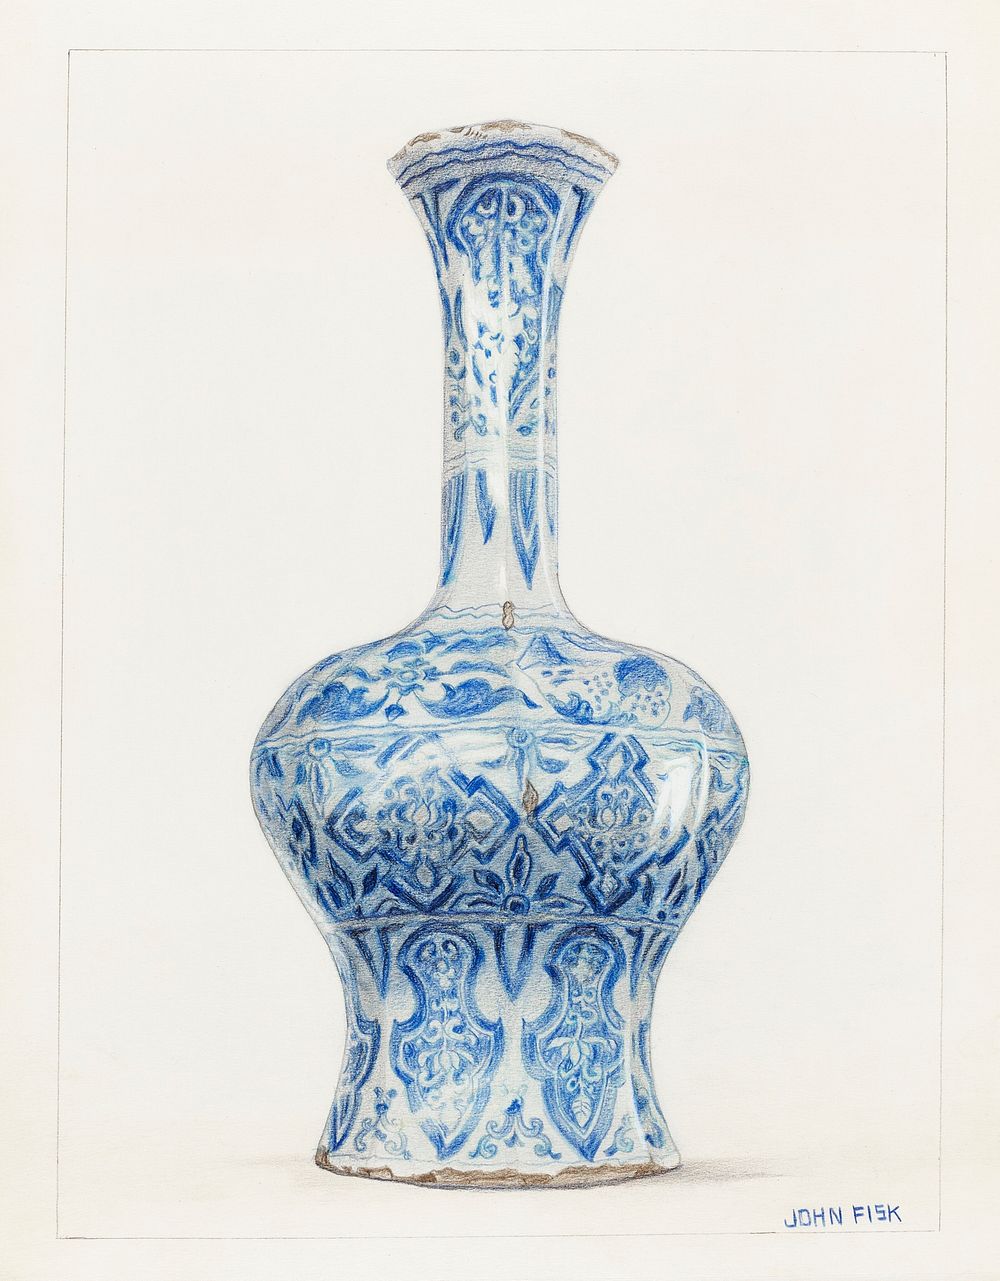 Porcelain Vase (1936) by John Fisk. Original from The National Gallery of Art. Digitally enhanced by rawpixel.